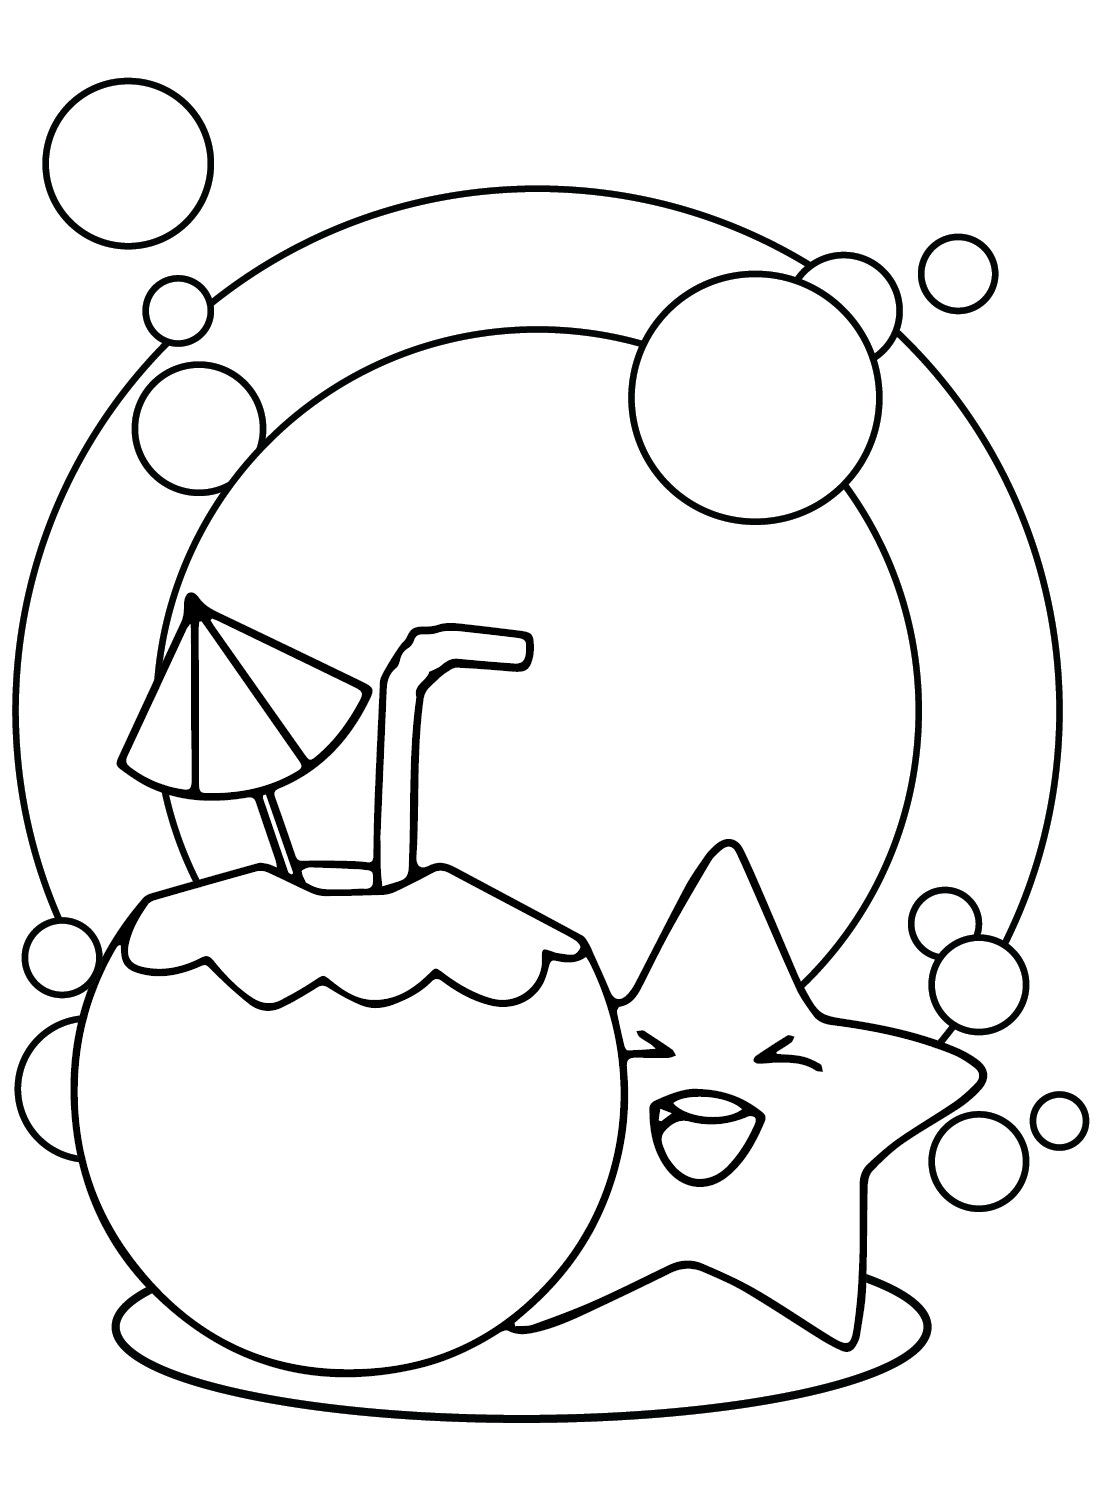 Coconut Images Coloring Page